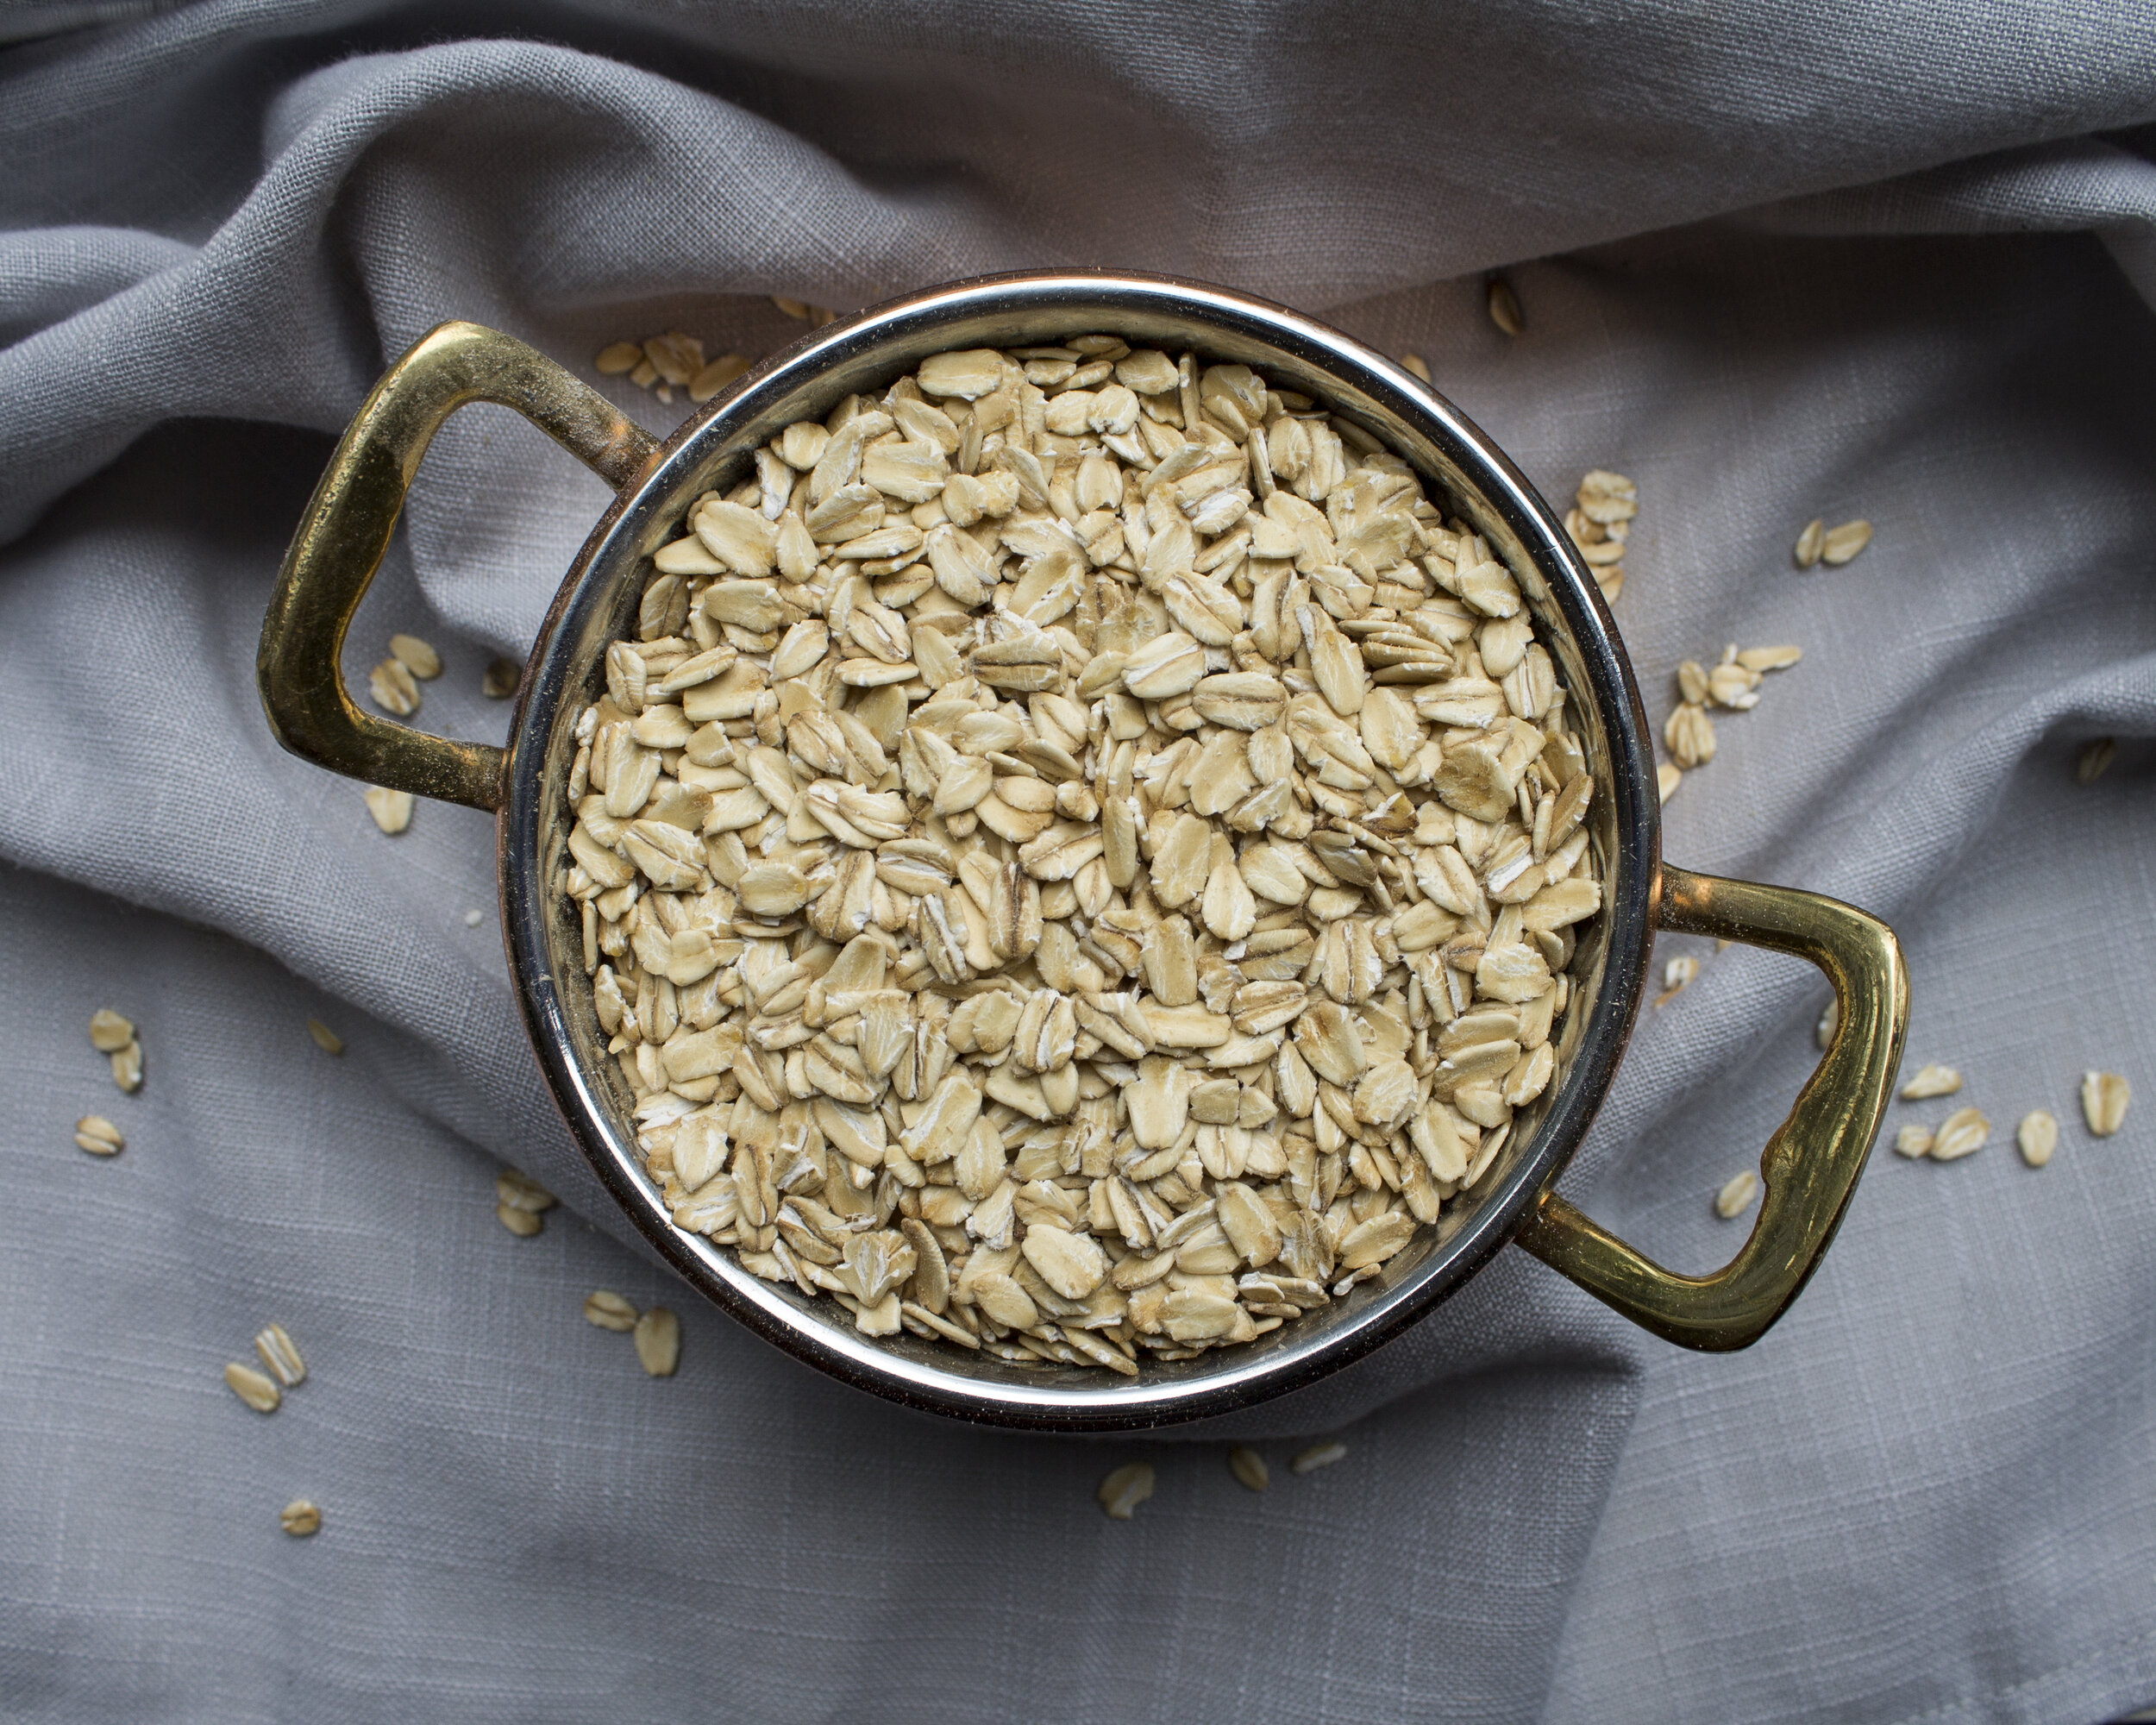 Rolled oats -slow cooking — Galloway's Wholesome Foods®